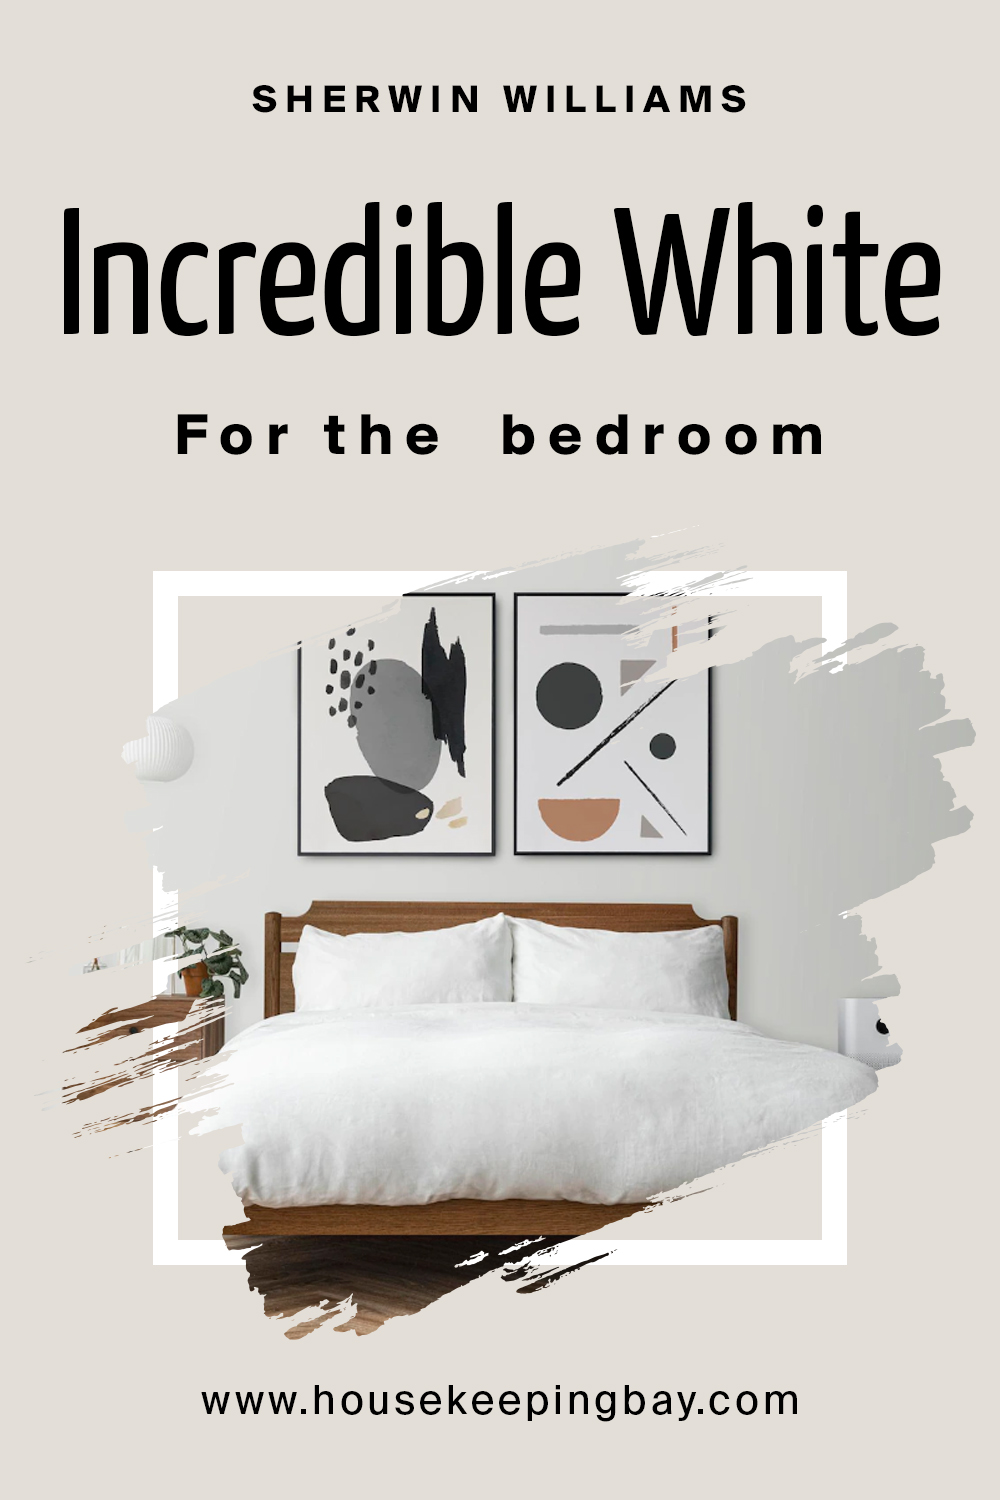 Sherwin Williams. Incredible White For the bedroom